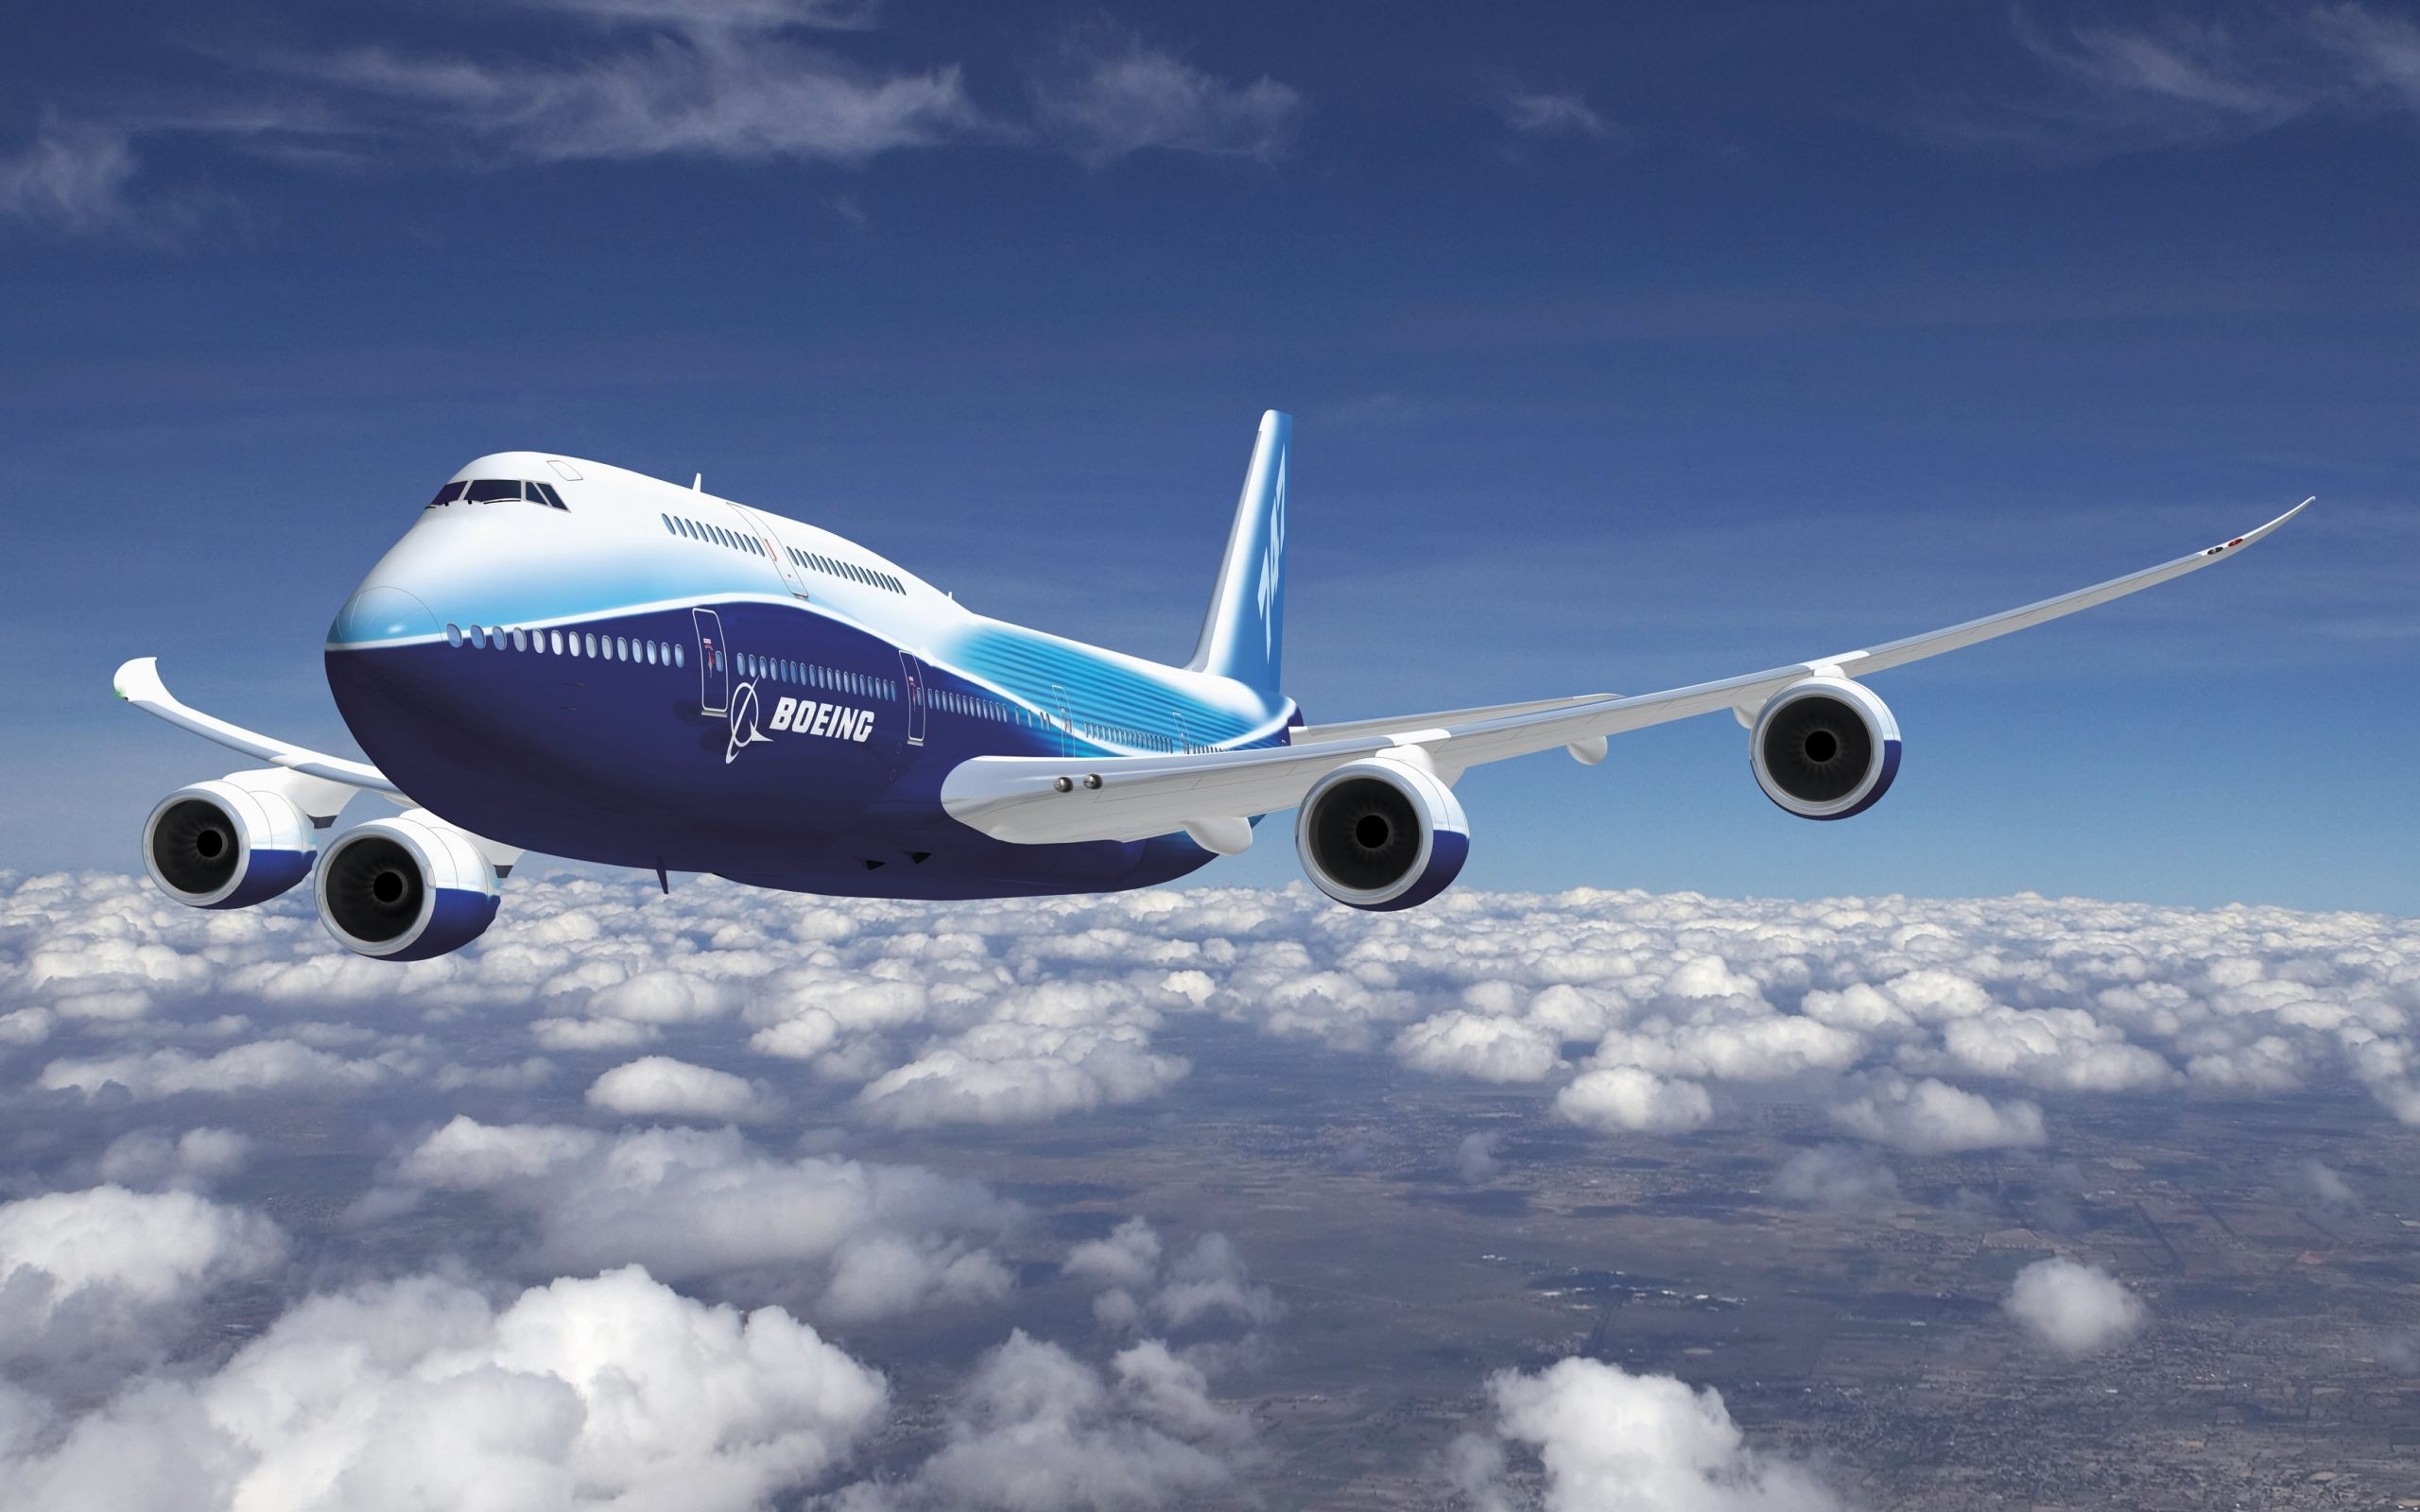 General 2560x1600 sky aircraft clouds passenger aircraft wings flying airplane Boeing Boeing 747 vehicle CGI